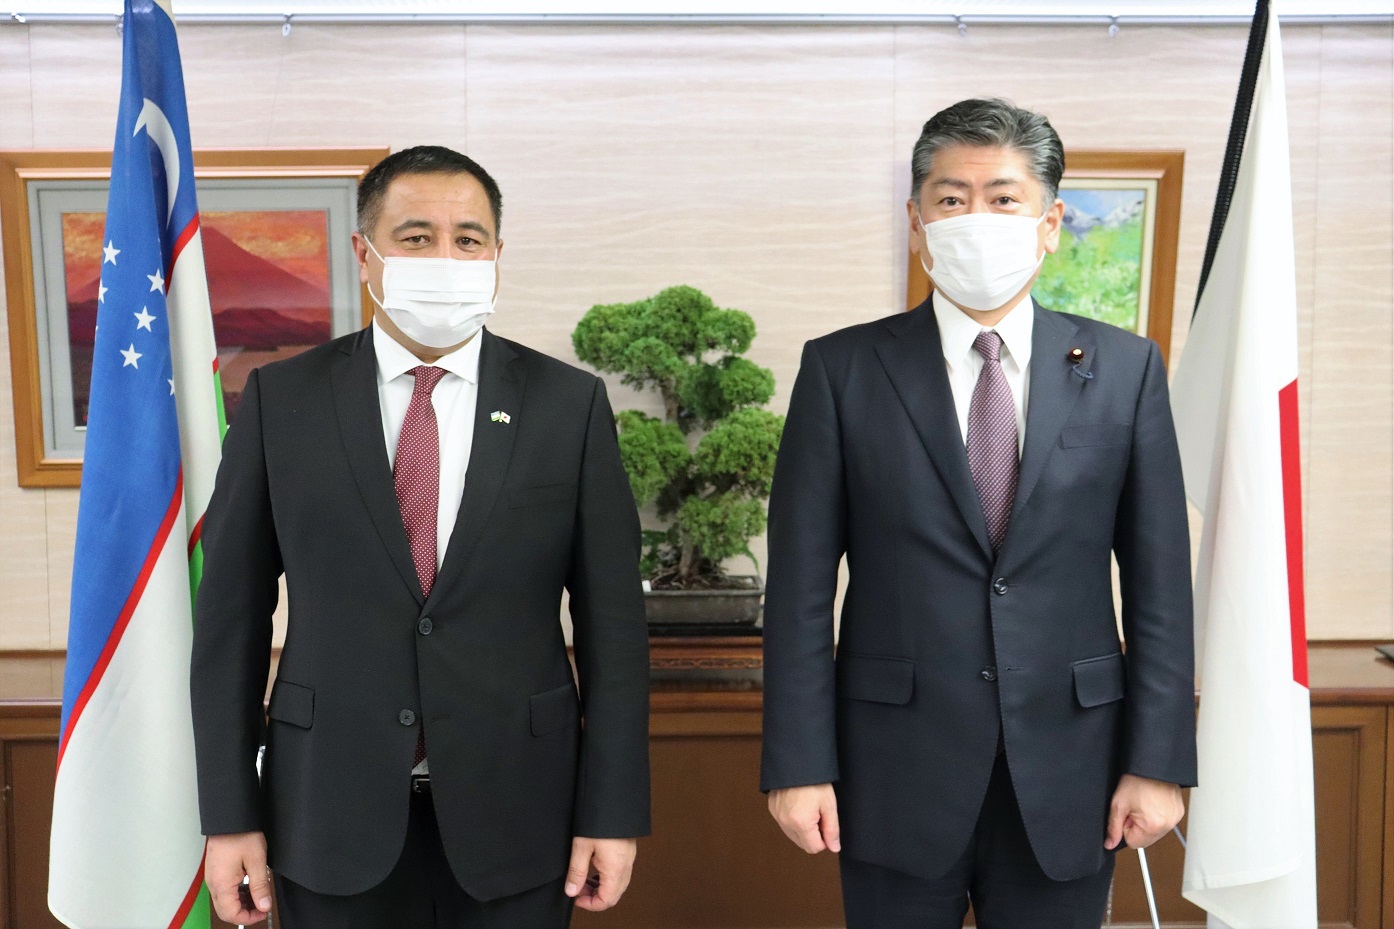 November 30, 2021 Justice Minister Received Courtesy Call from Ambassador of the Republic of Uzbekistan to Japan